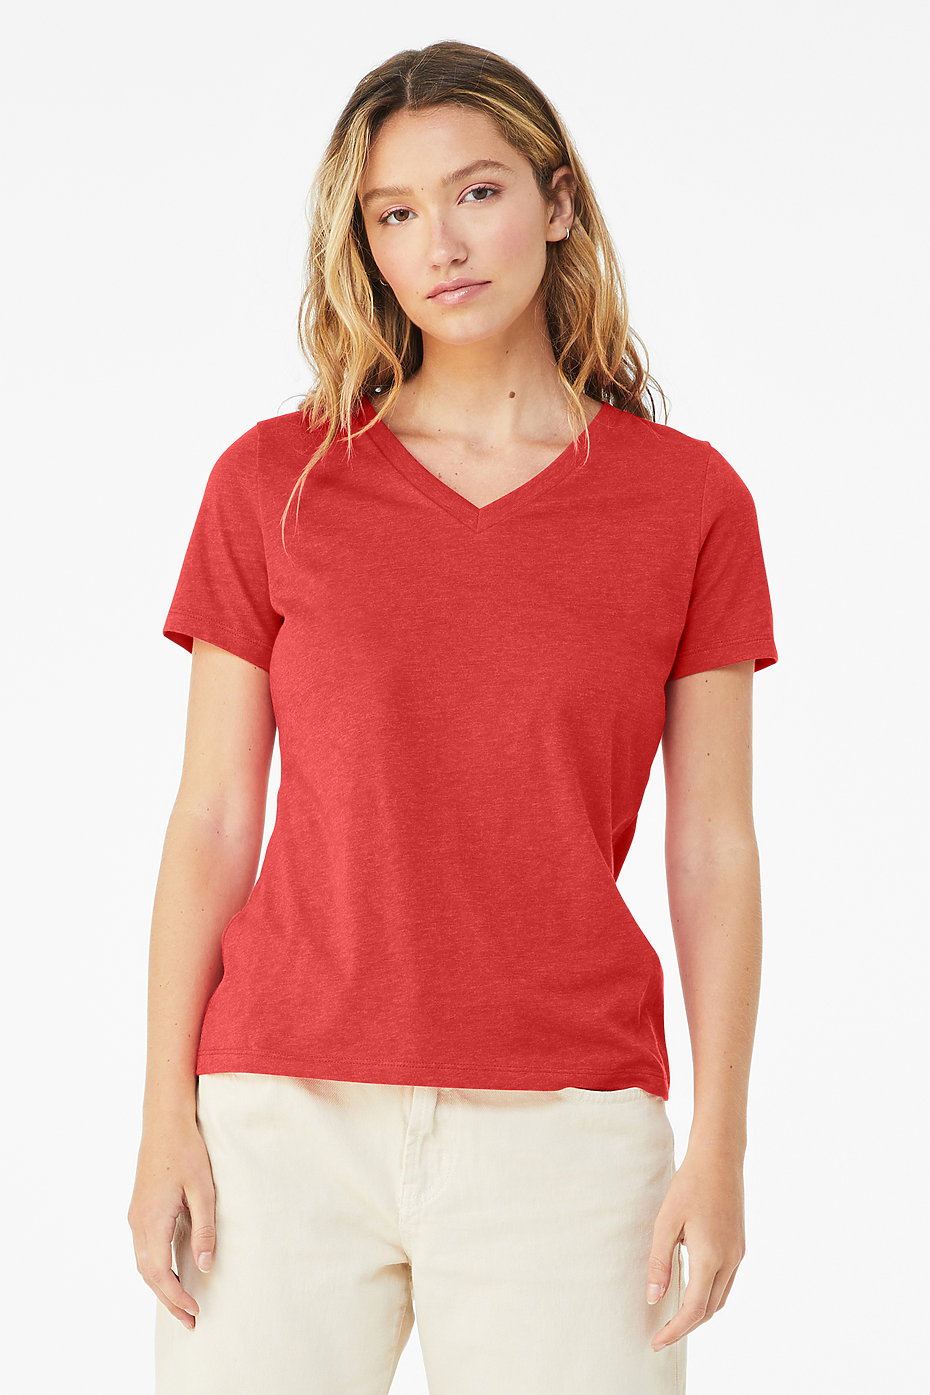 an Brand Bella + Canvas Ladies Relaxed Jersey Short-Sleeve V-Neck T-Shirt -  Athletic Heather - S at  Women's Clothing store